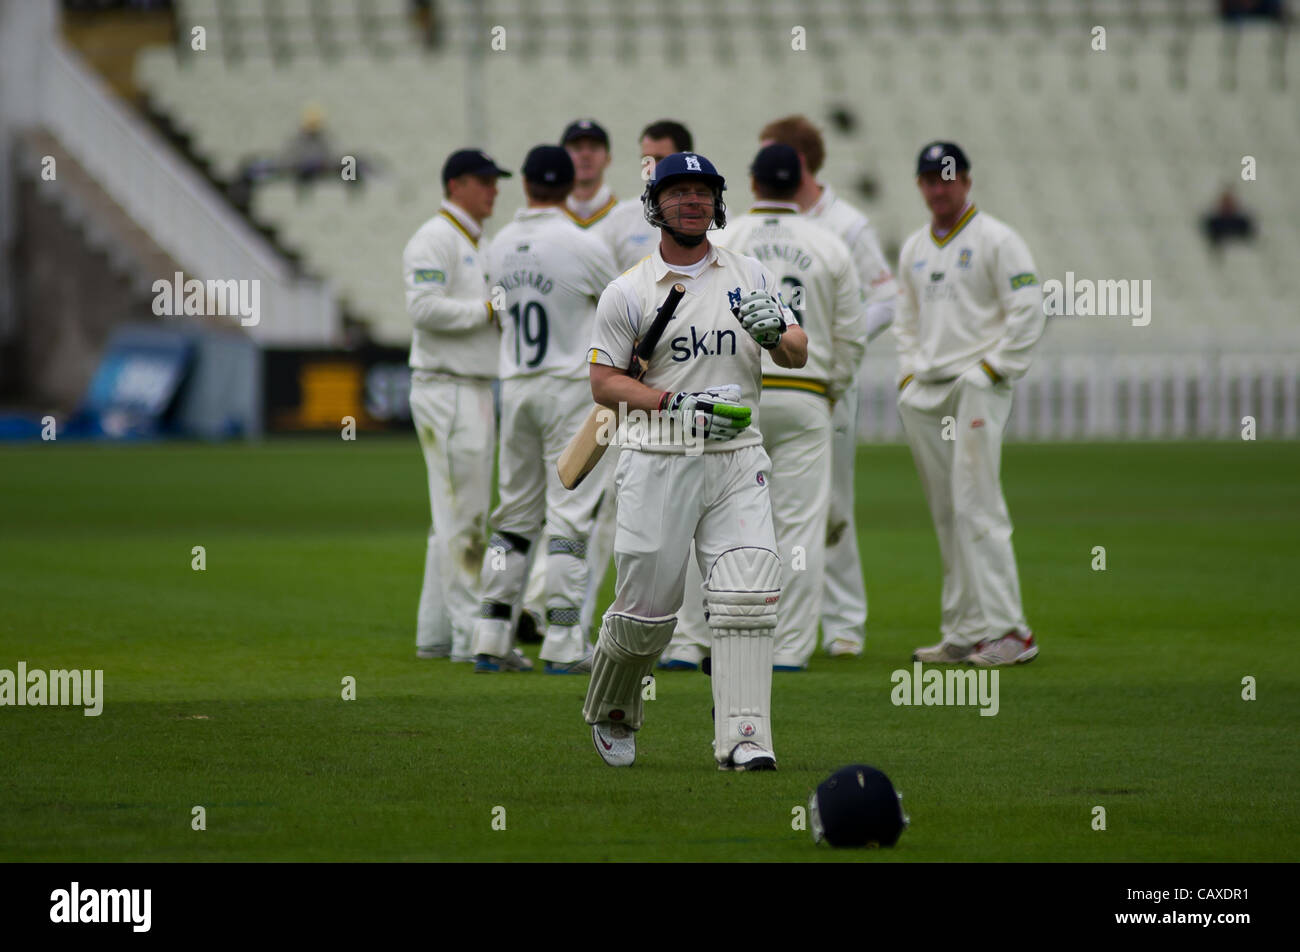 02.05.2012 Birmingham, England. Warwickshire v Durham County. Darren Maddy leaves the field as Phil Mustard celebrates his catch  during the LV County Championship match played at Edgbaston. Stock Photo